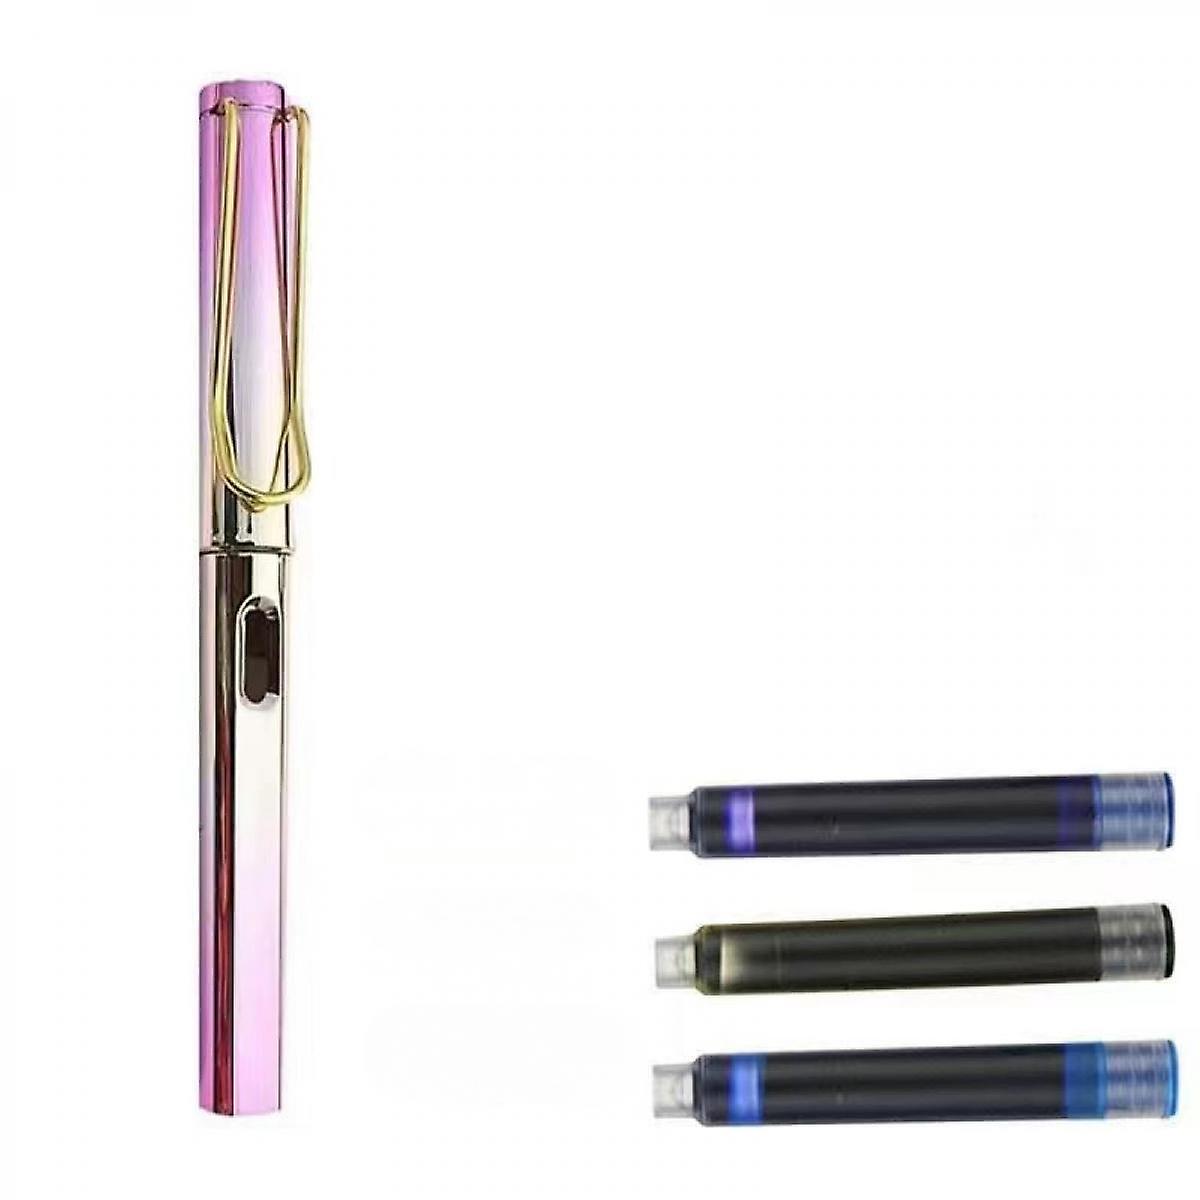 Pen， Gradient Metal Pen  With Gradient Pen With Ink Sac For Boy And Girl Students Stationary Supplies